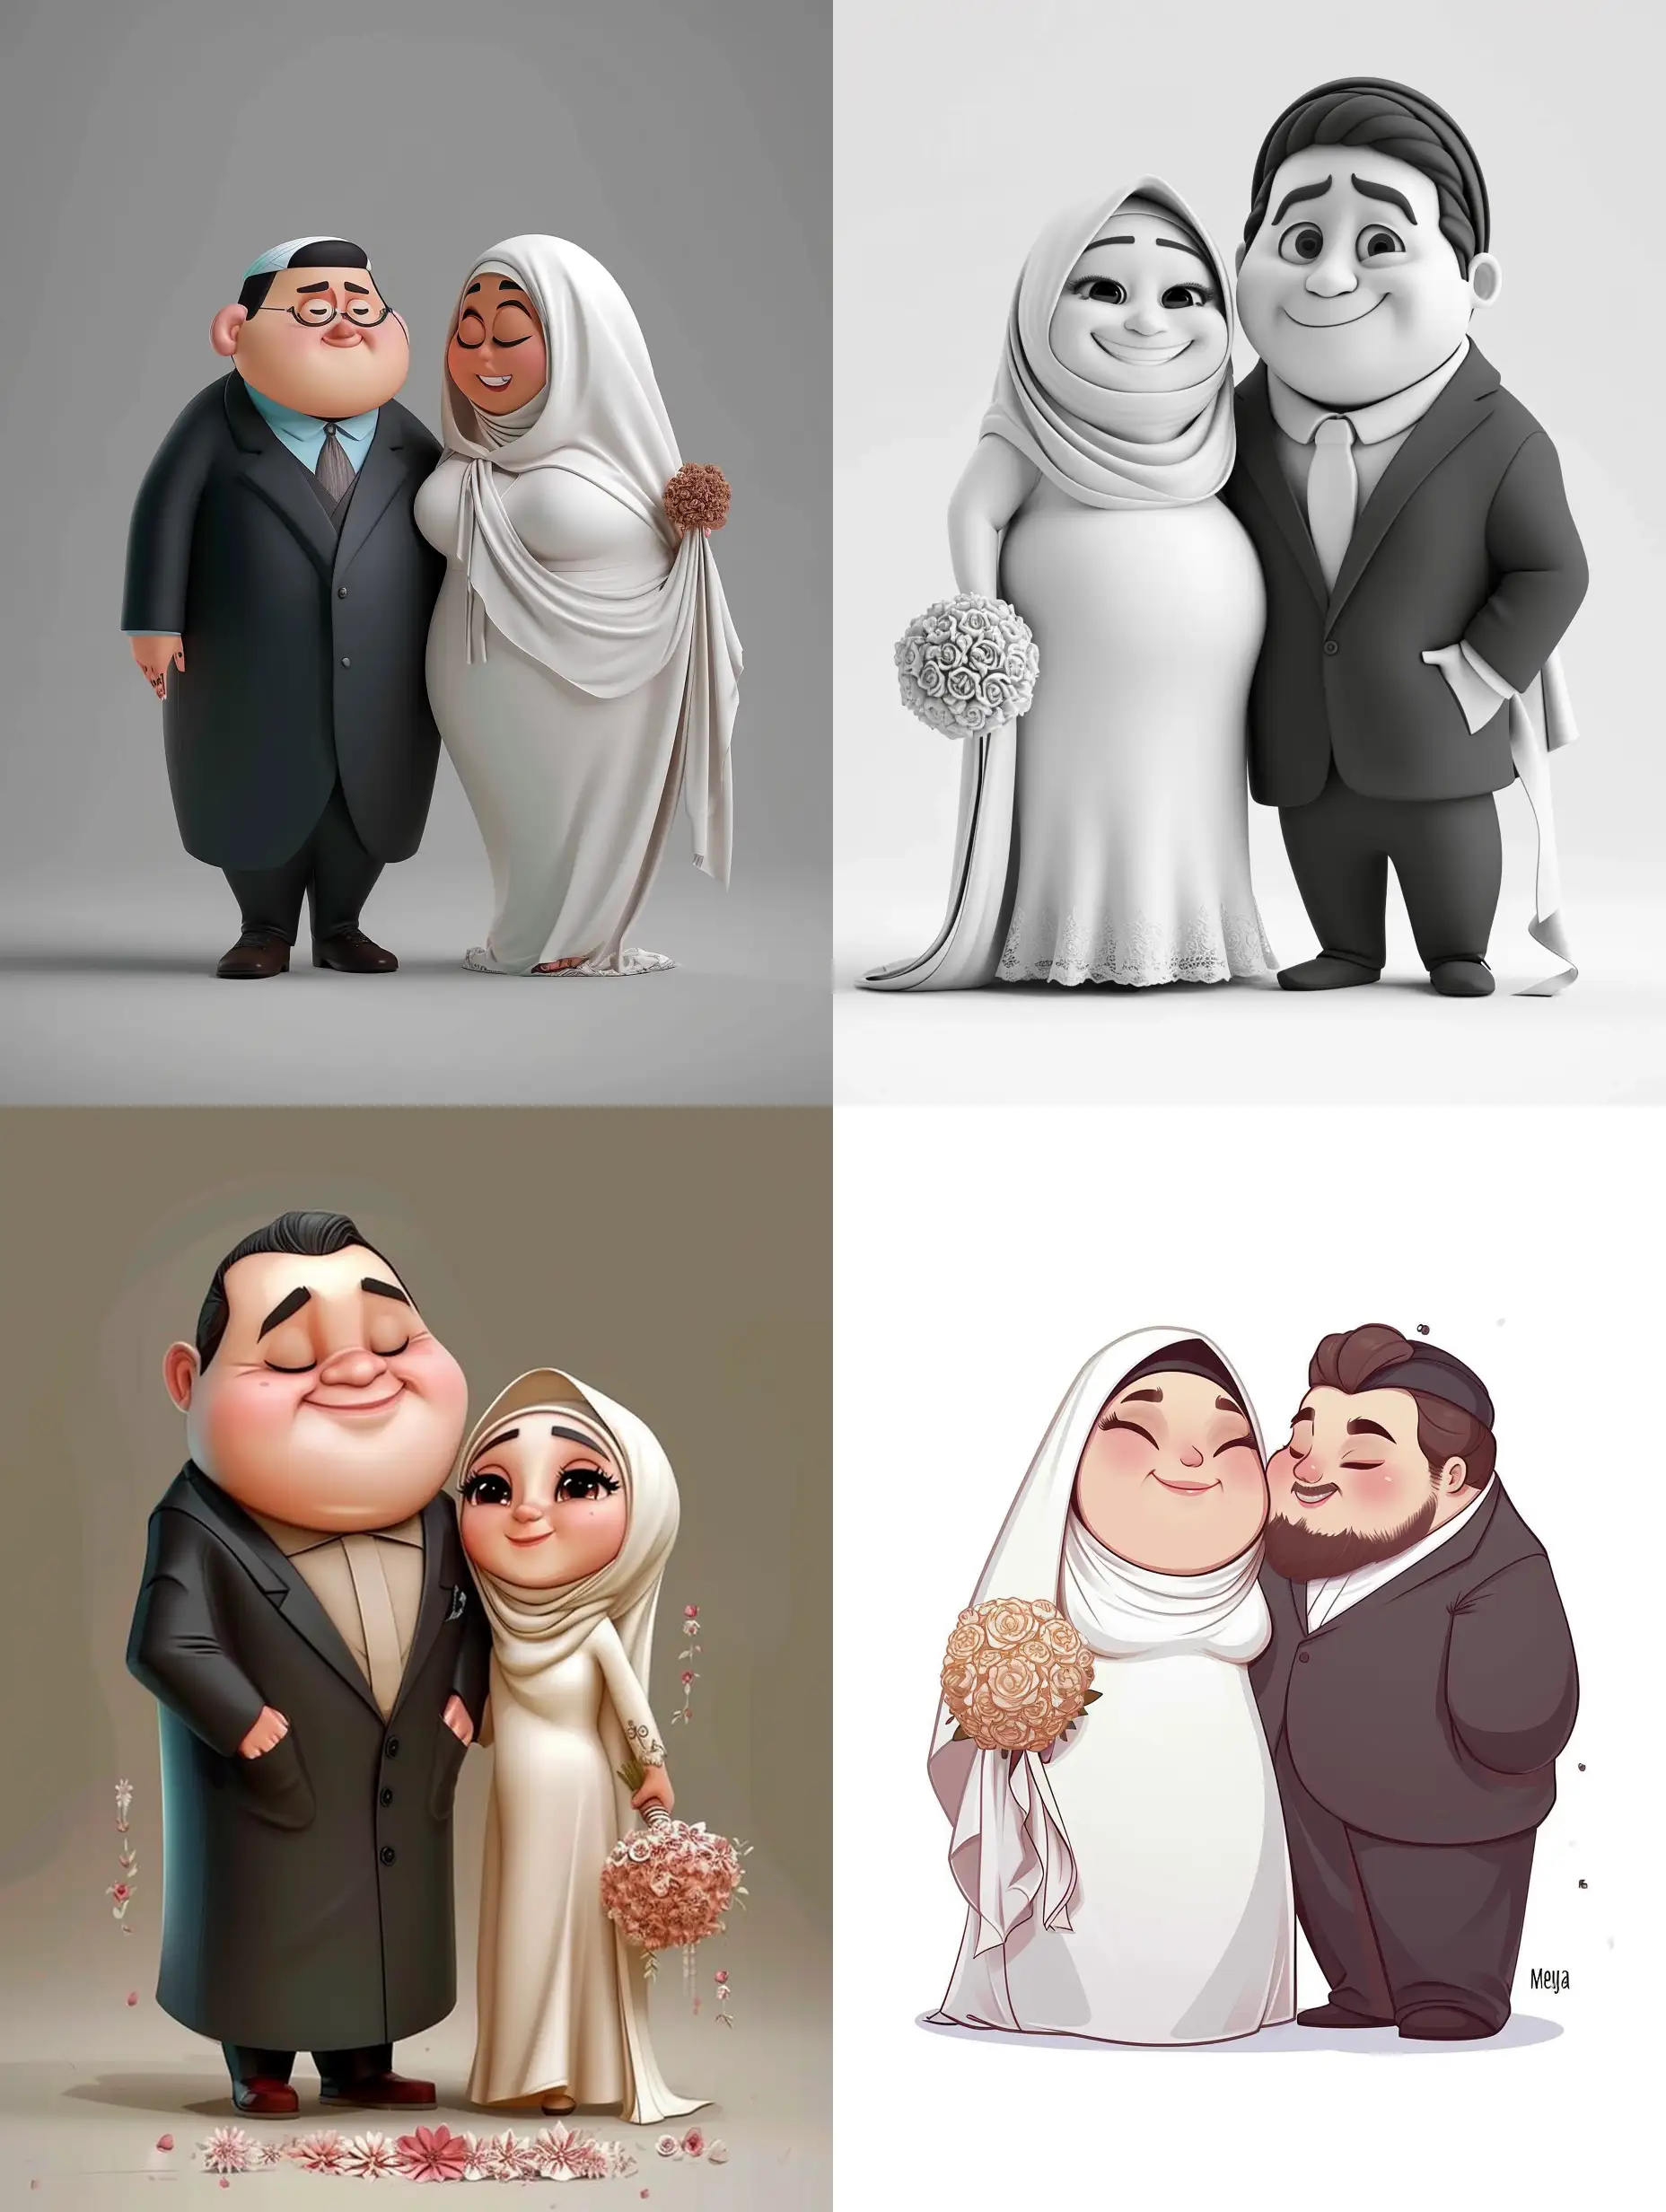 Instagram page view id "mey3am_a", Instagram page"mey3am_a " posted on Instagram under the handle 'mey3am_a "Create a cartoony 3D Persian fat face man cute and skinny women characters  cute characters, you and your wife are very stylishly  white dressed. Instagram page id "mey3am_a,You have a dark suit with a light shirt. Your wife is wearing a hijab bright dress with a cloth hanging from her head. You look a beautiful bouquet Instagram page id "mey3am_a"